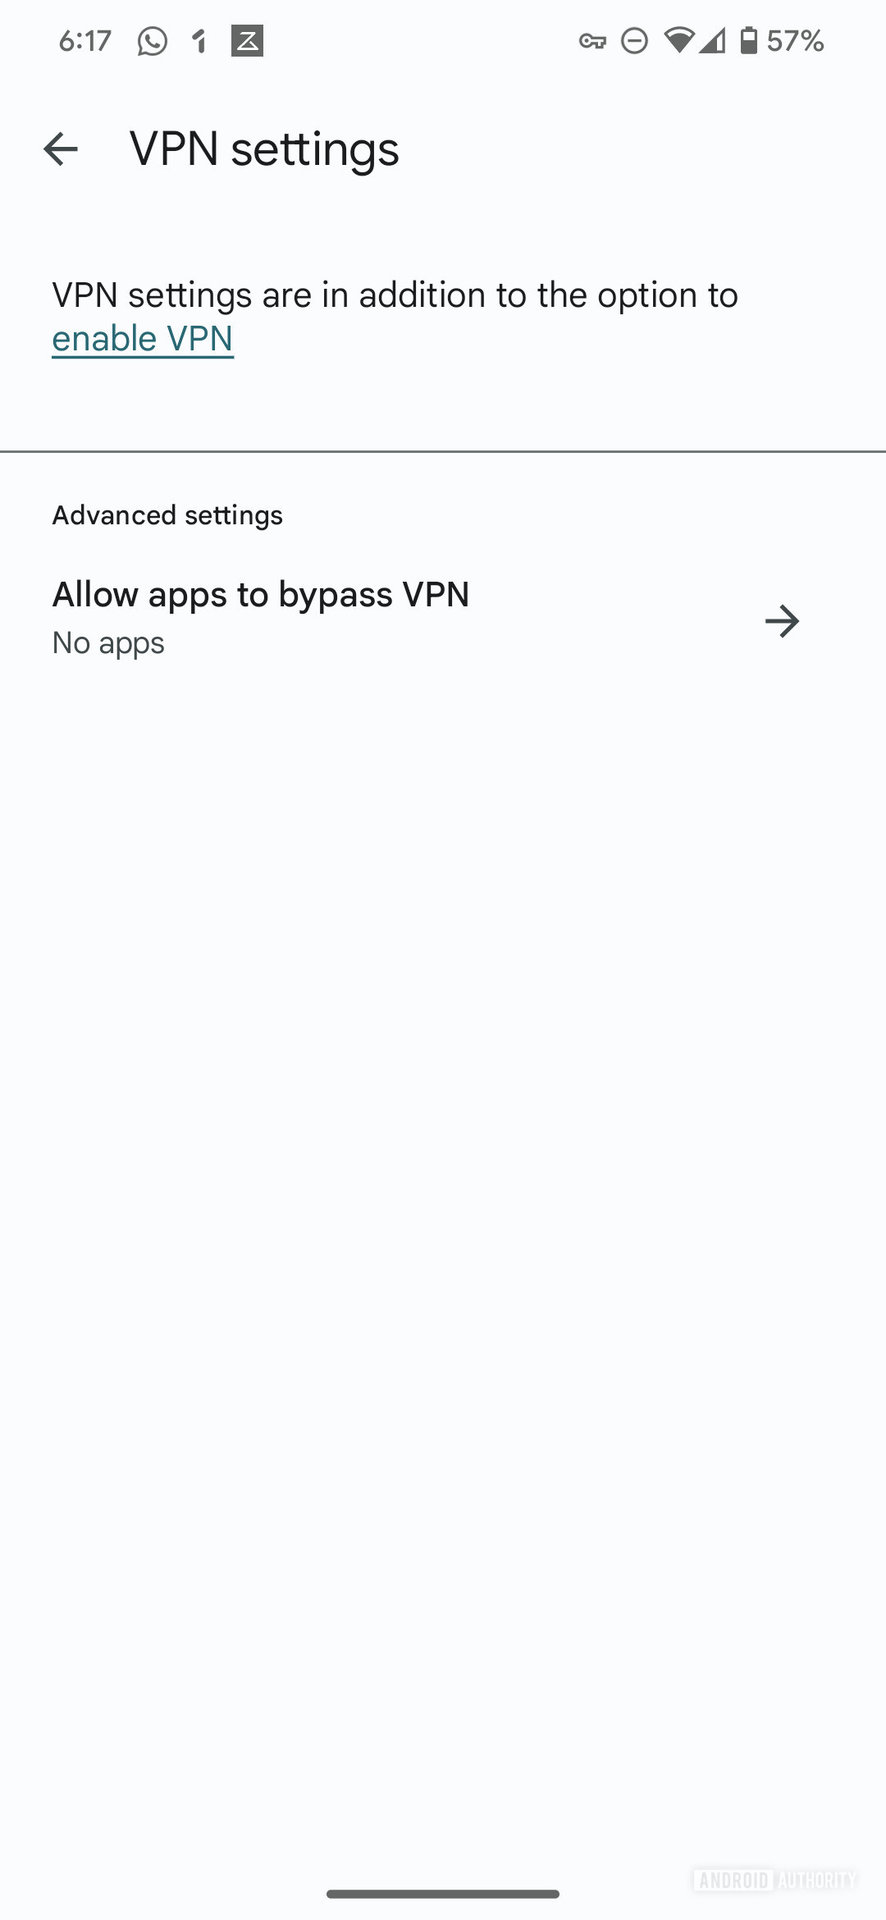 A screenshot of the Google One VPN interface showing the settings screen and the option to let apps bypass the VPN.